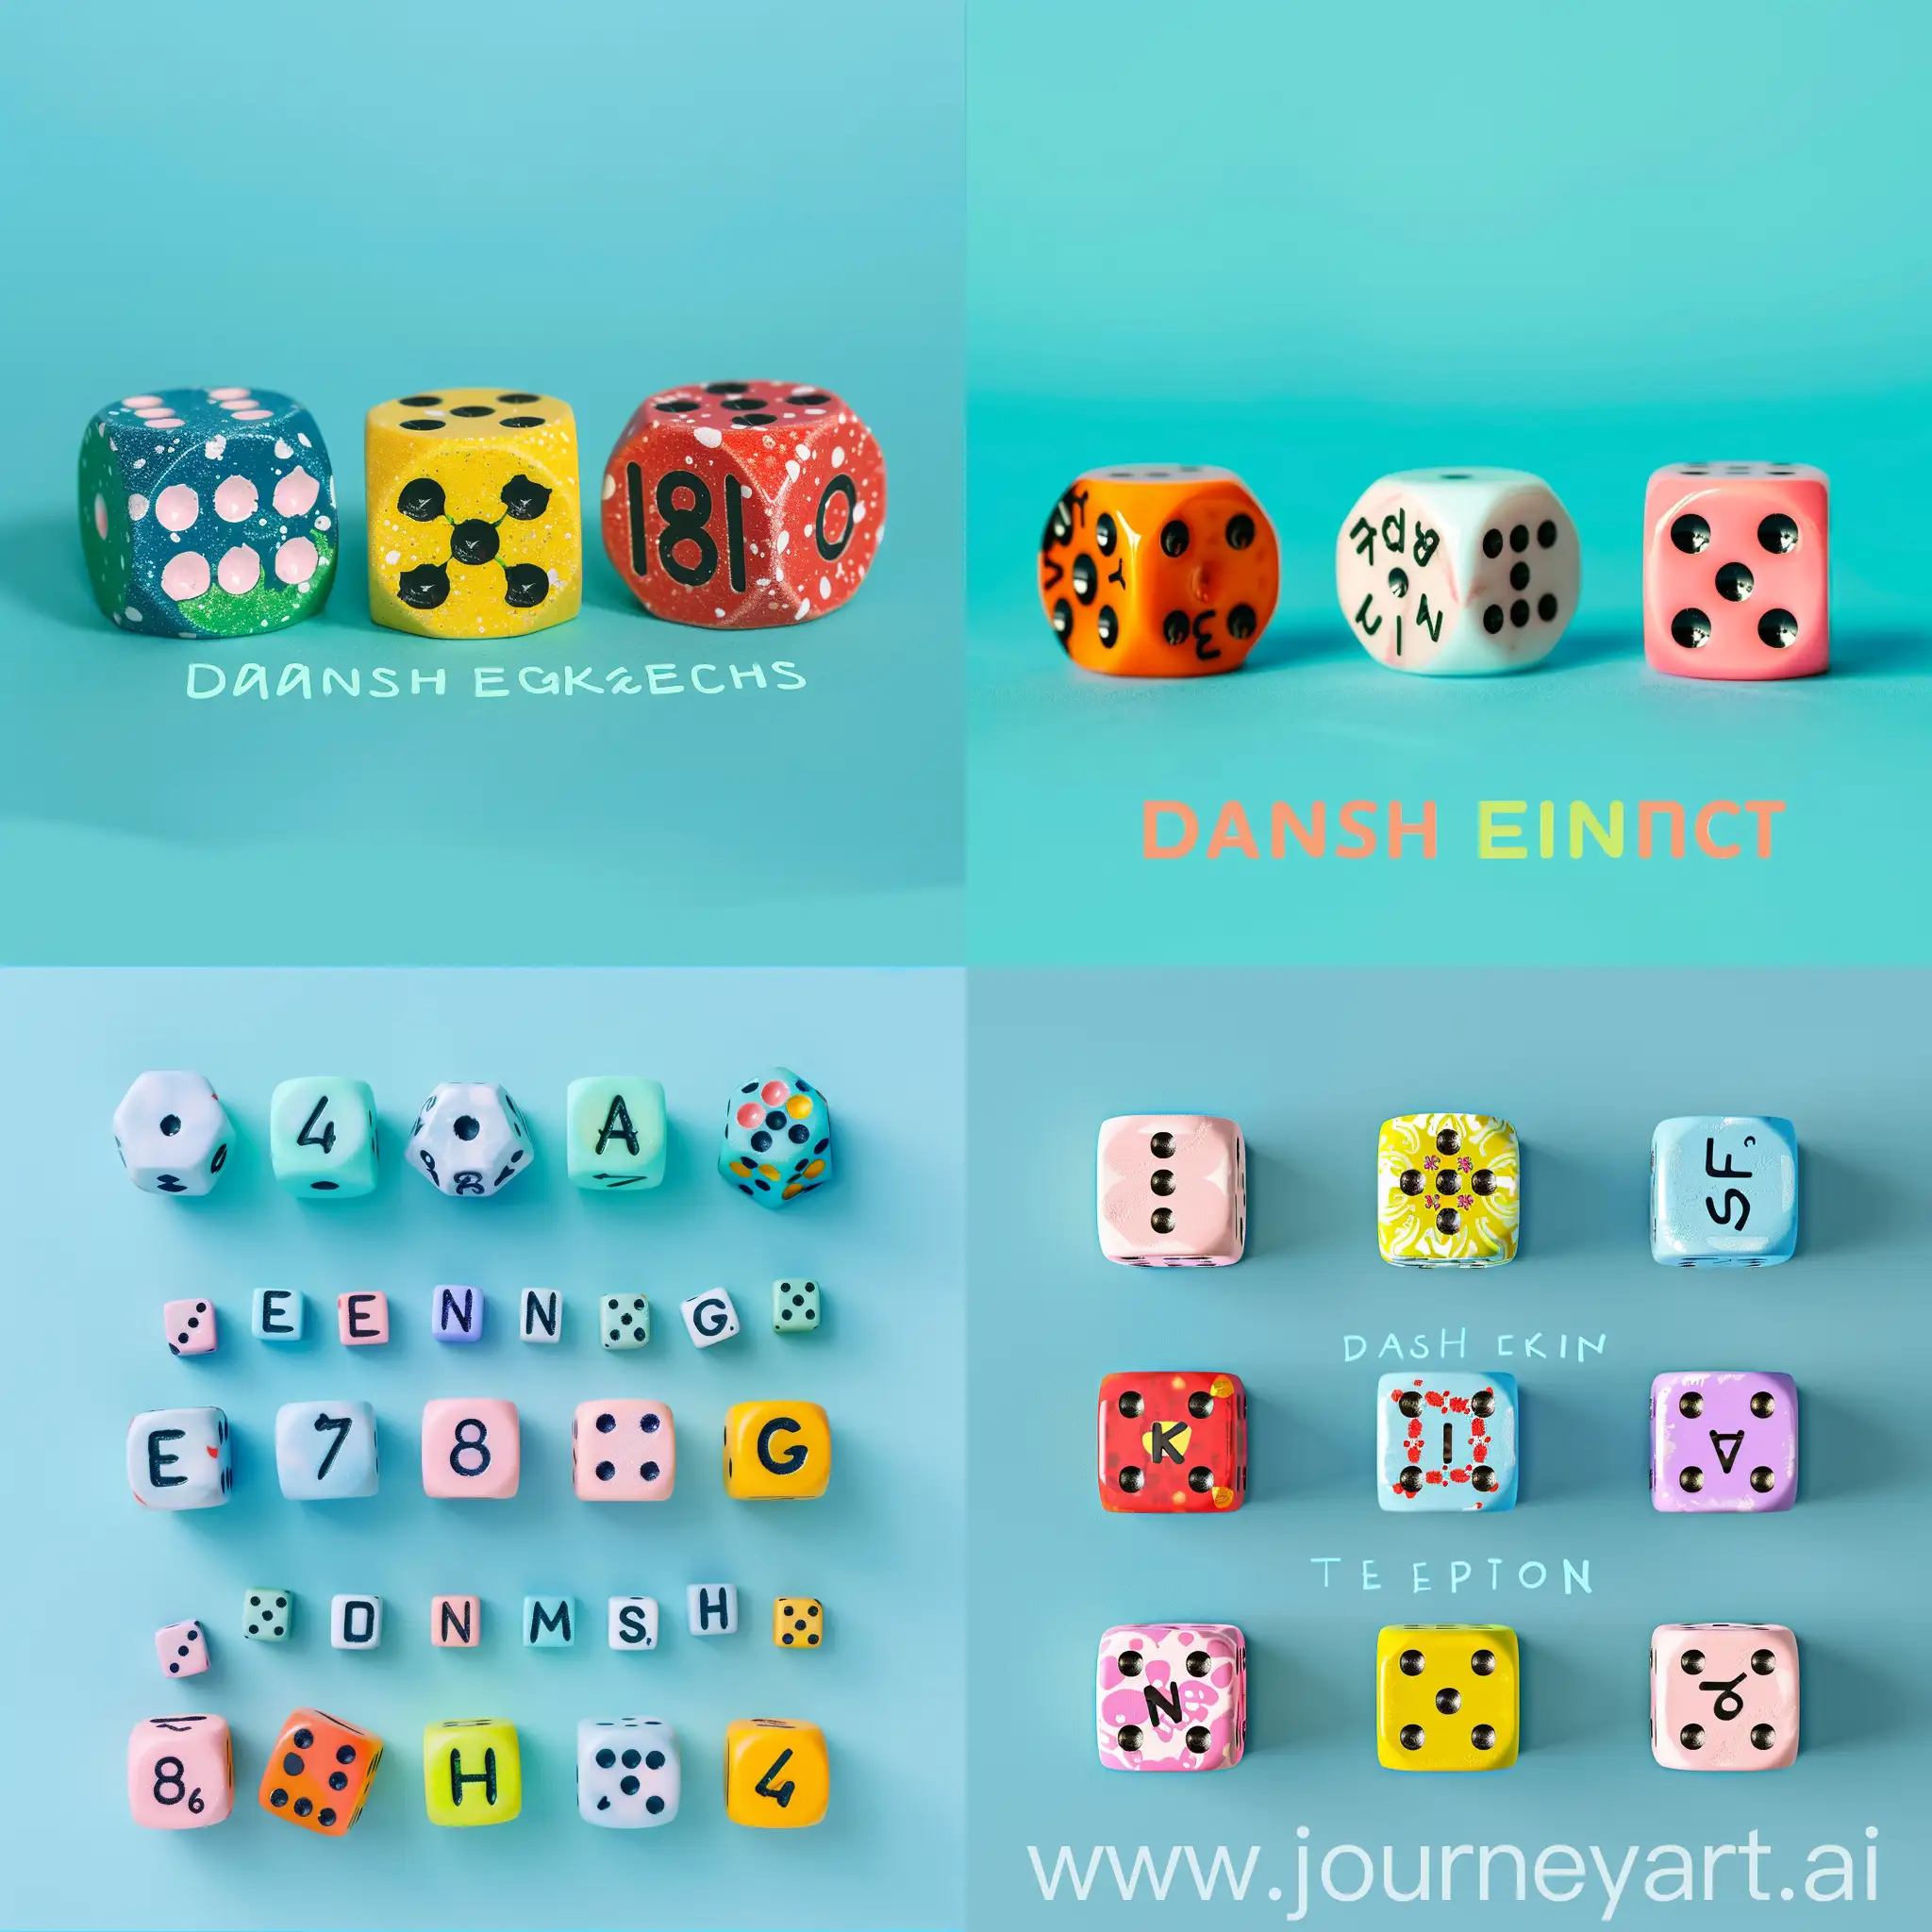 a text "Danesh English festival"that each letter written on seperate colorfull dice in three lines with light blue background perspective view